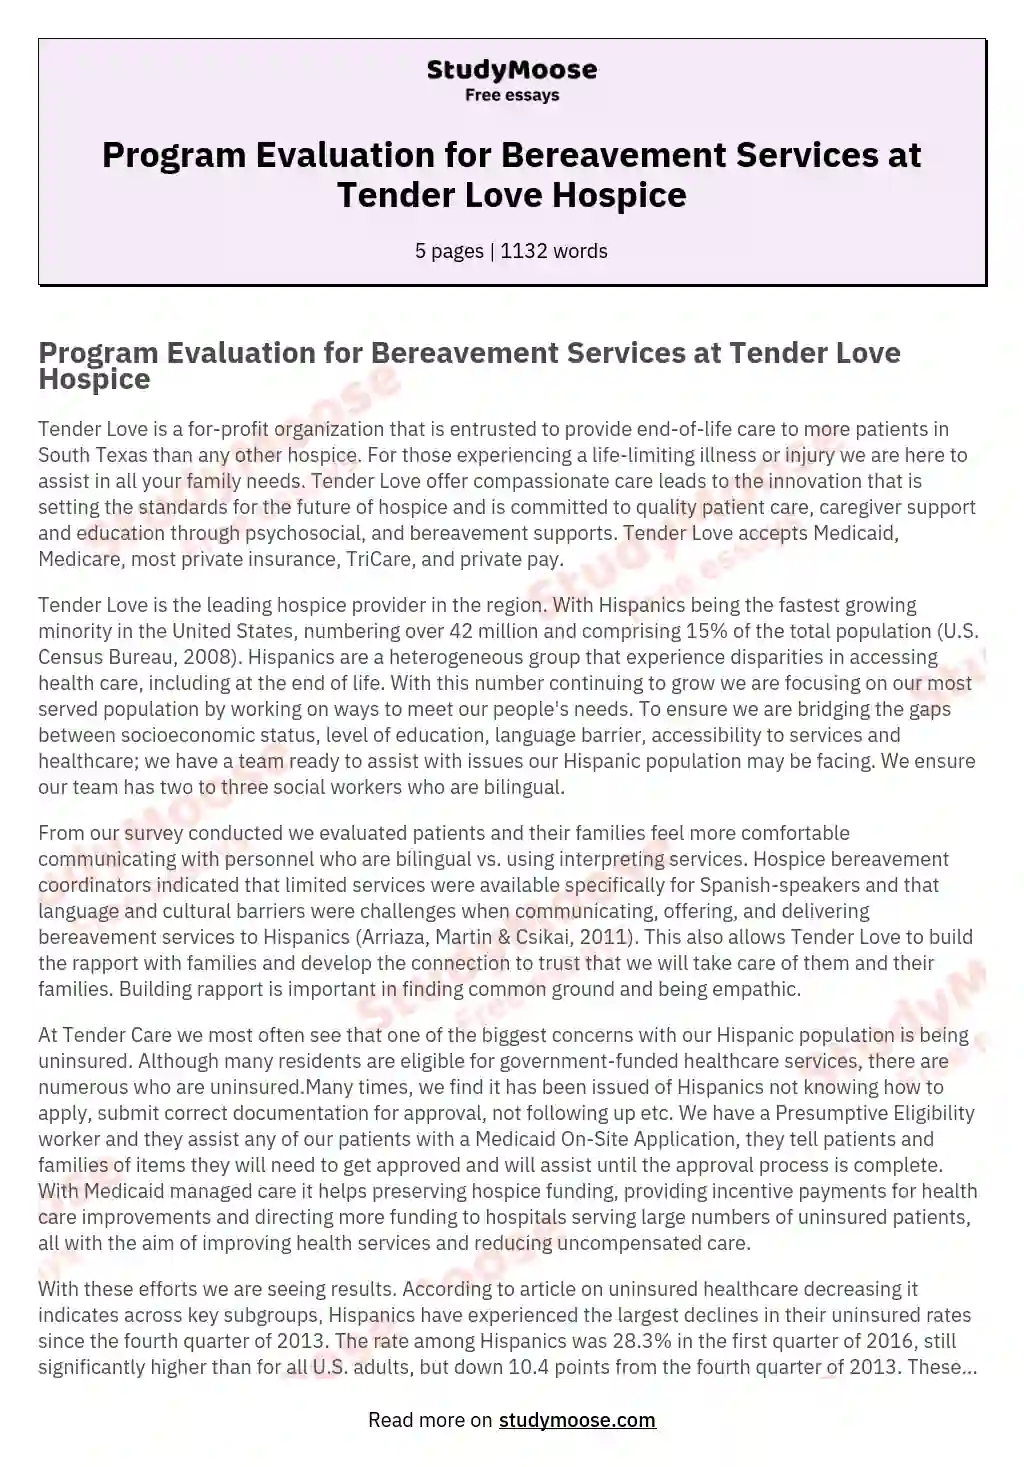 Program Evaluation for Bereavement Services at Tender Love Hospice essay